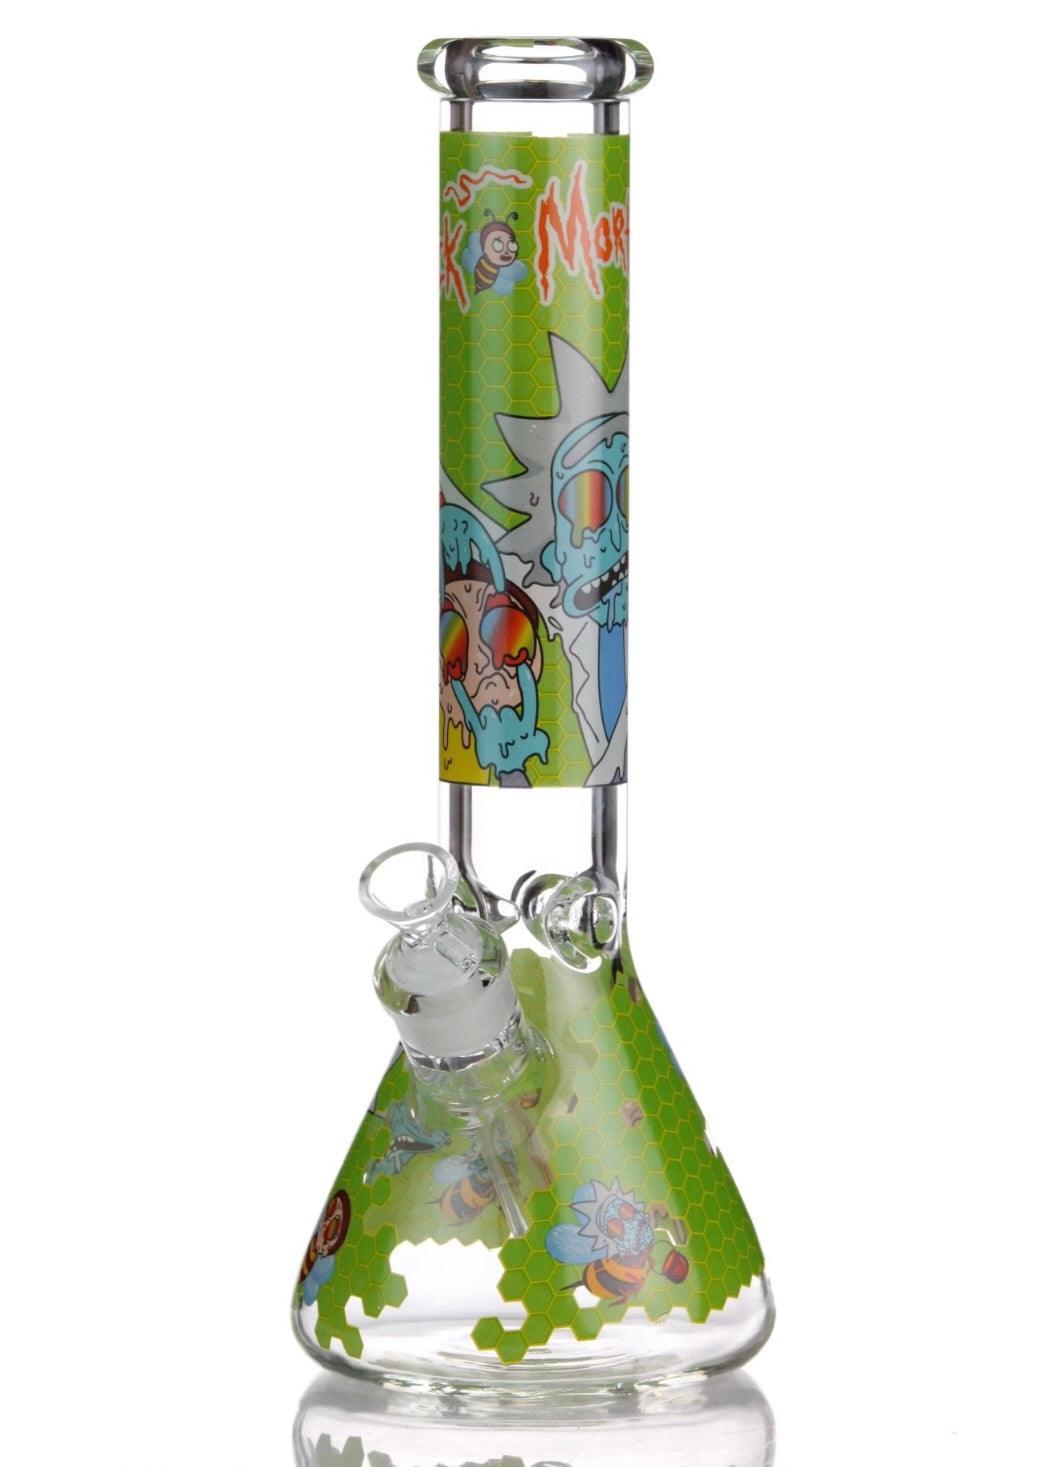 rick and morty bong with green honeycomb design. Rick pulling Morty's eyes down, exposing rainbow eyes